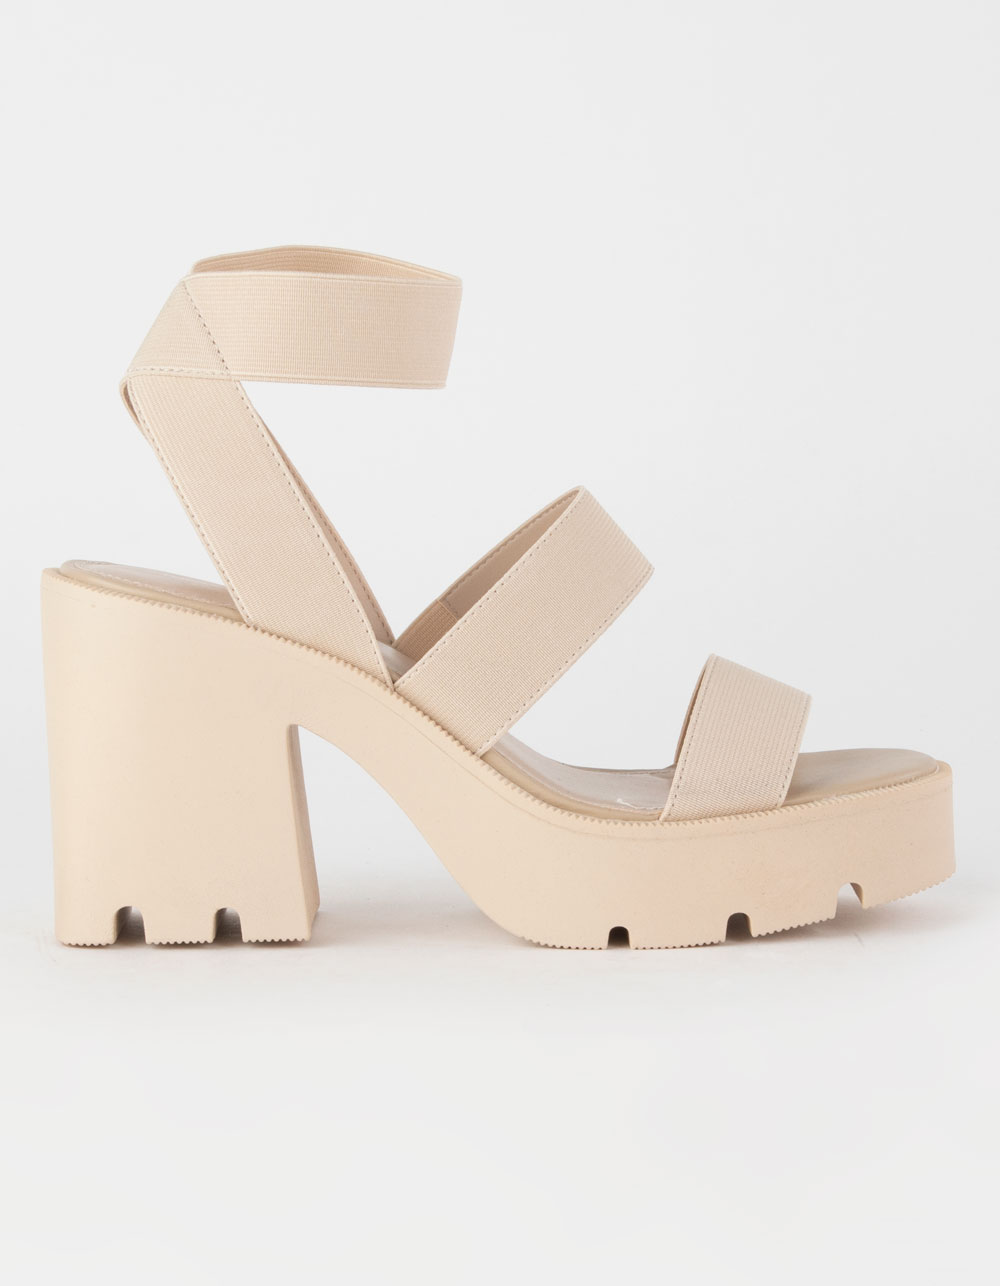 MADDEN GIRL Templee Womens Shoes - SAND | Tillys